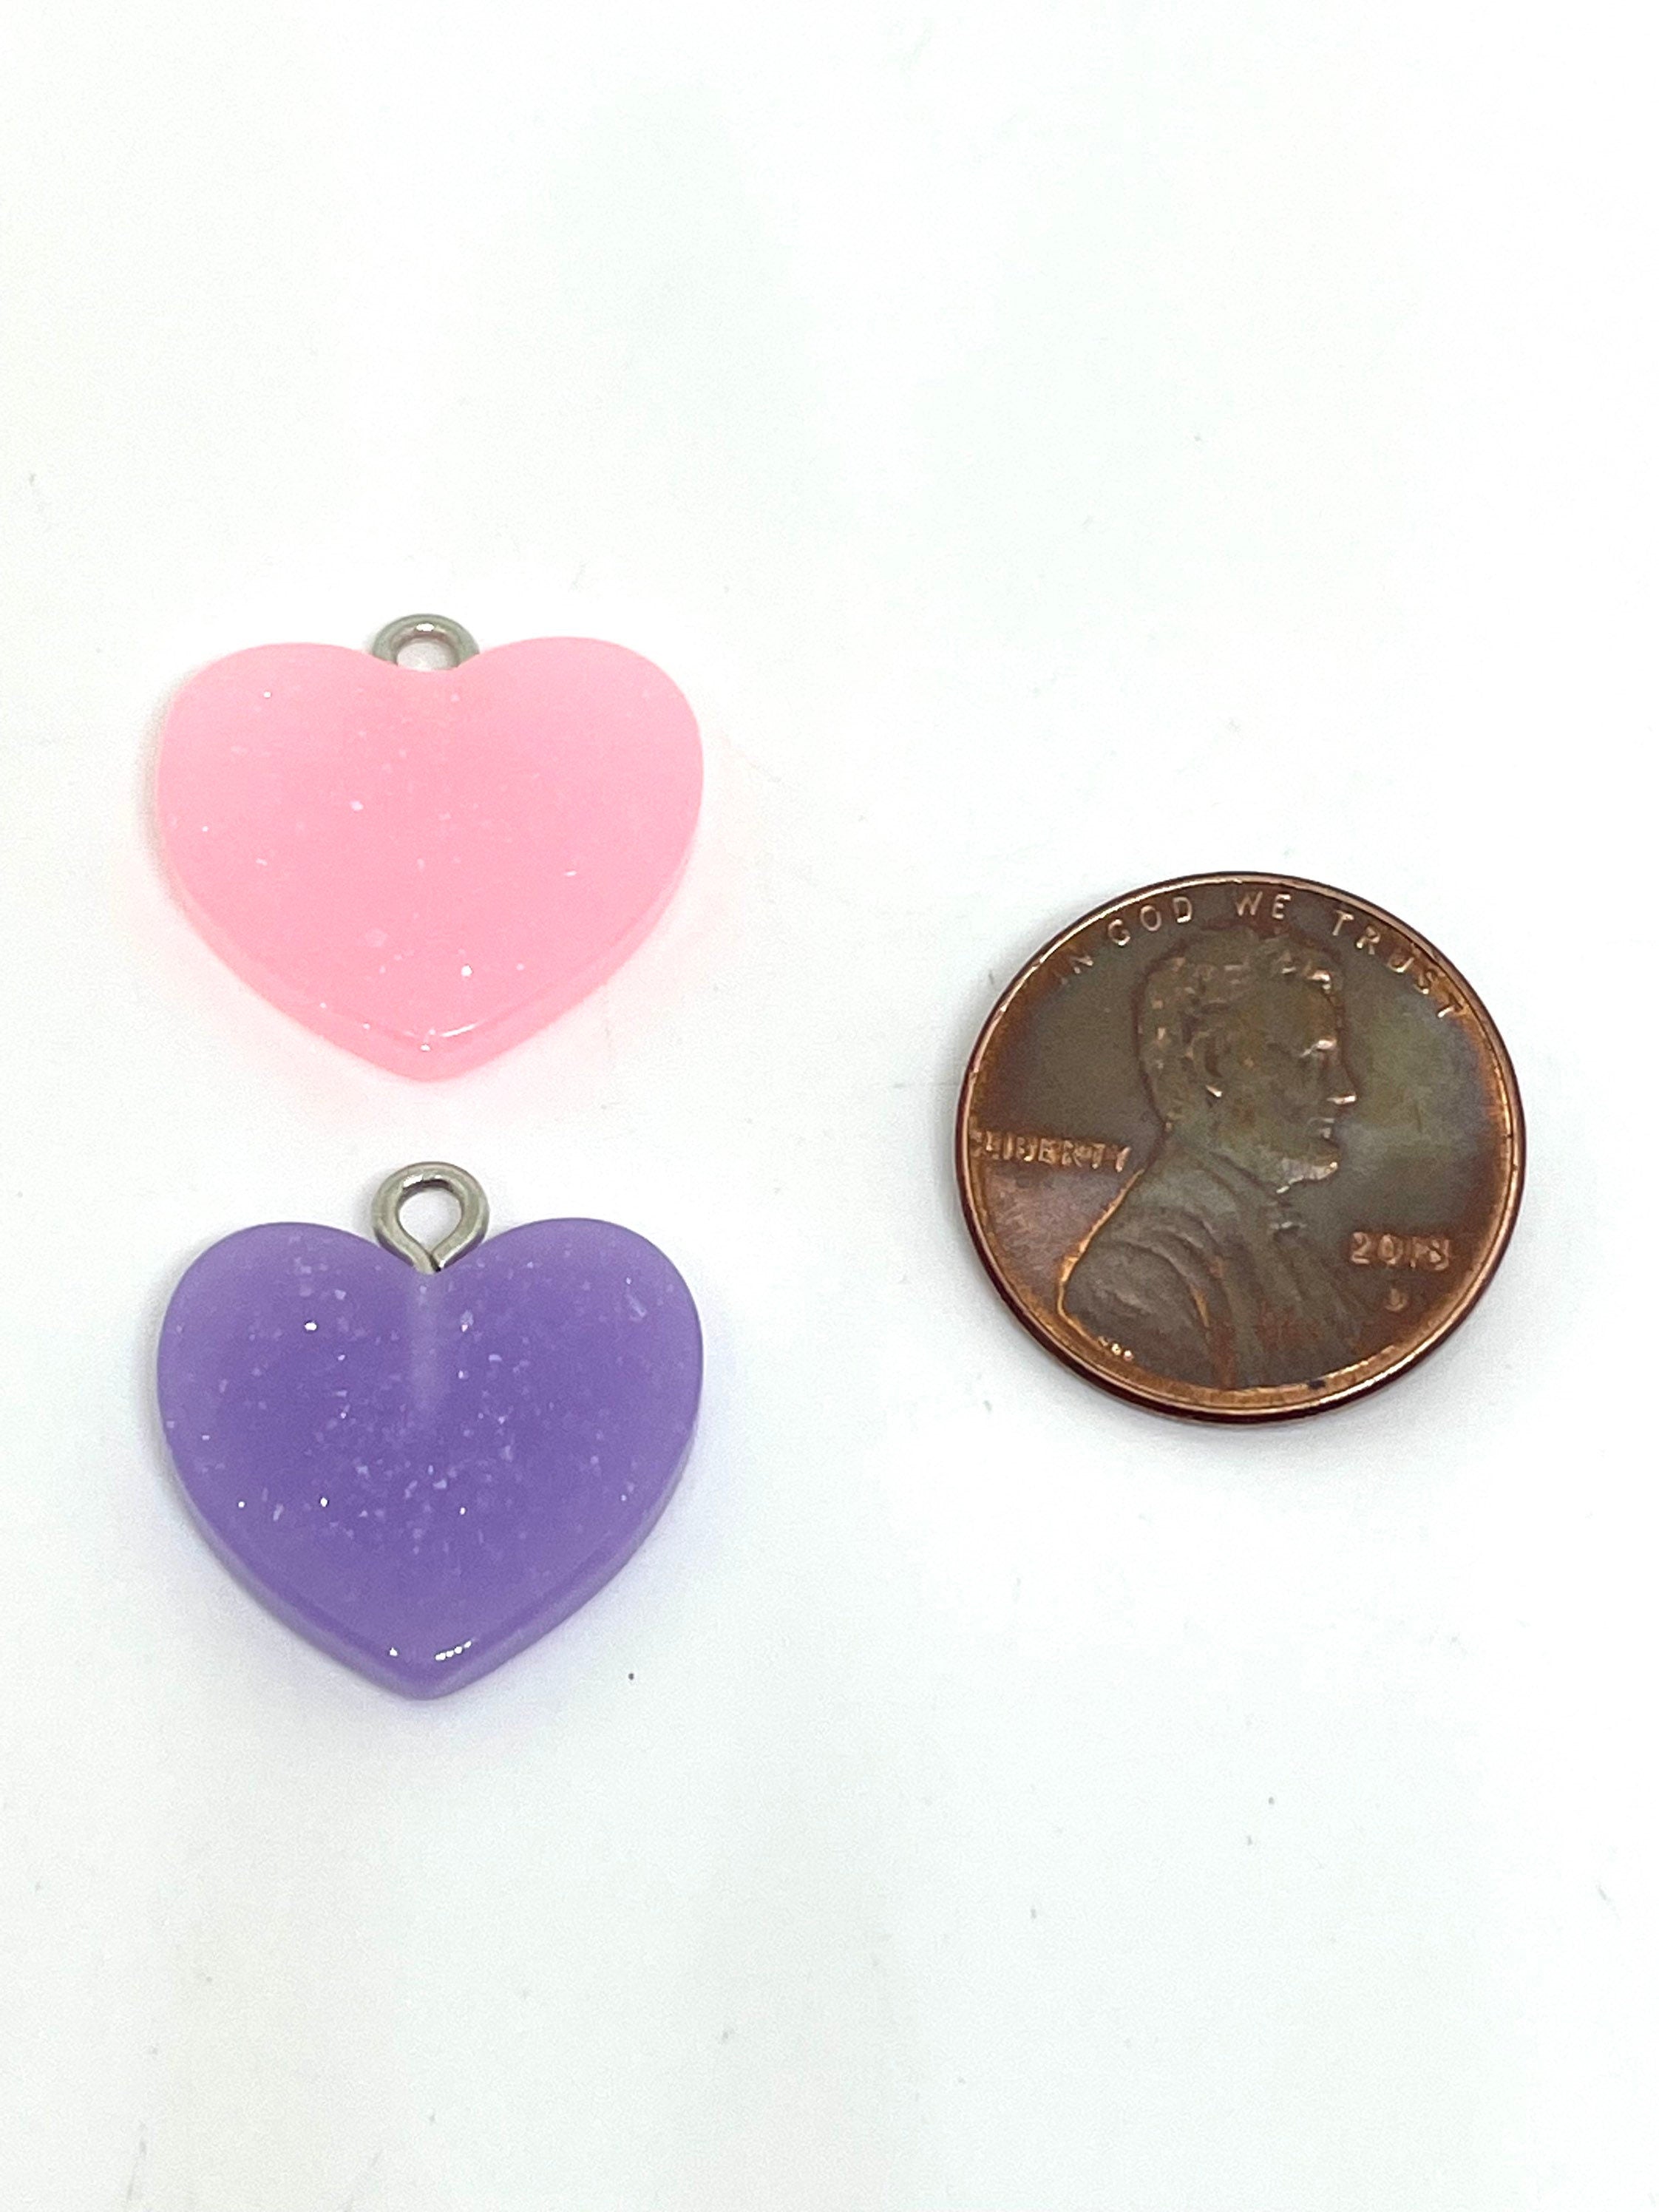 Cute Resin Heart Charms for Jewelry Making, Pastel Heart Charms for Necklace, Bracelet, Kawaii Charms 10 Pieces